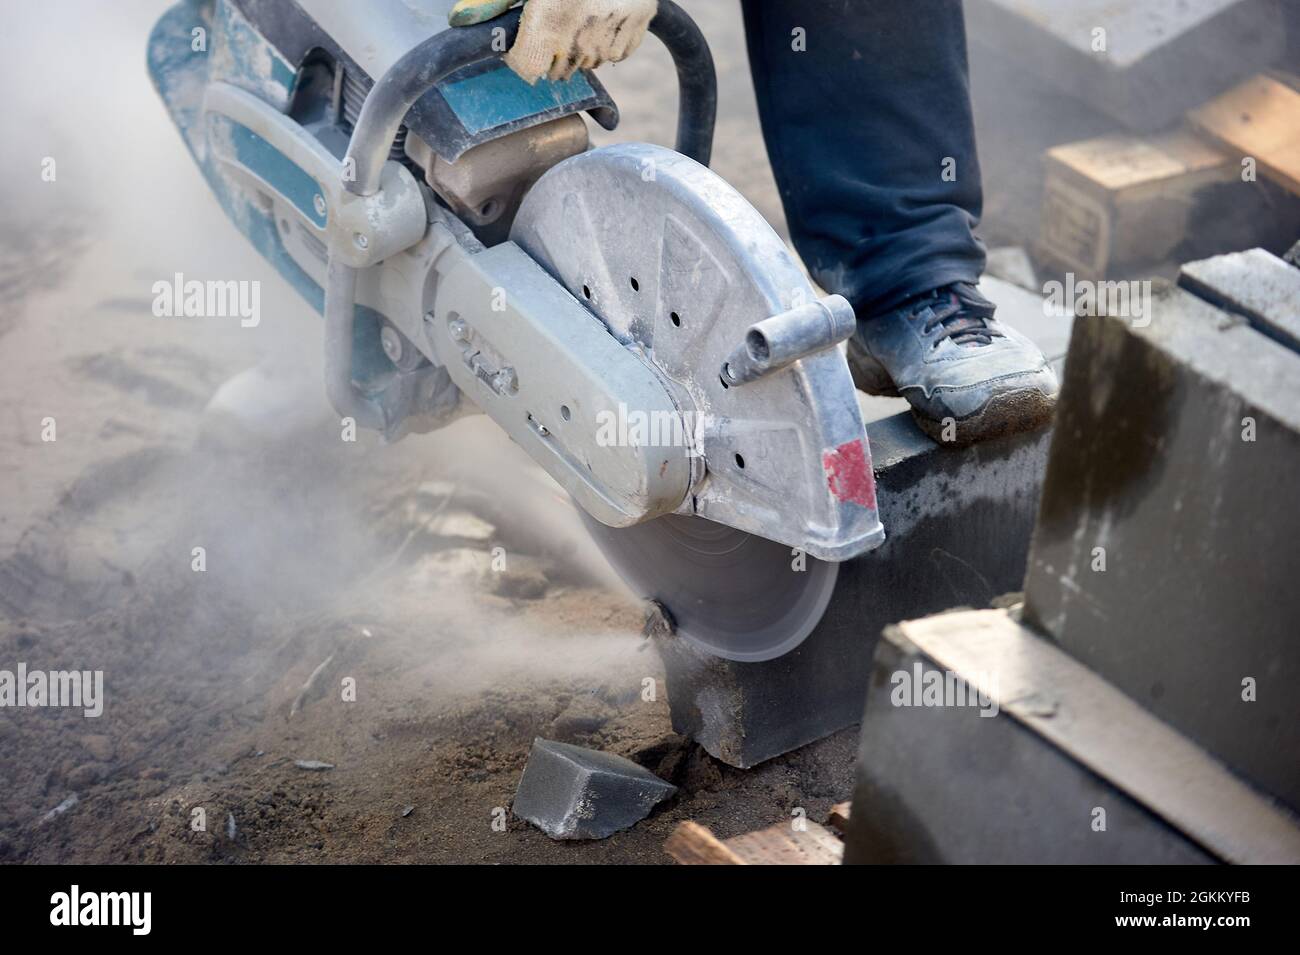 A worker with a circular saw cuts a curb stone close-up. Stock Photo